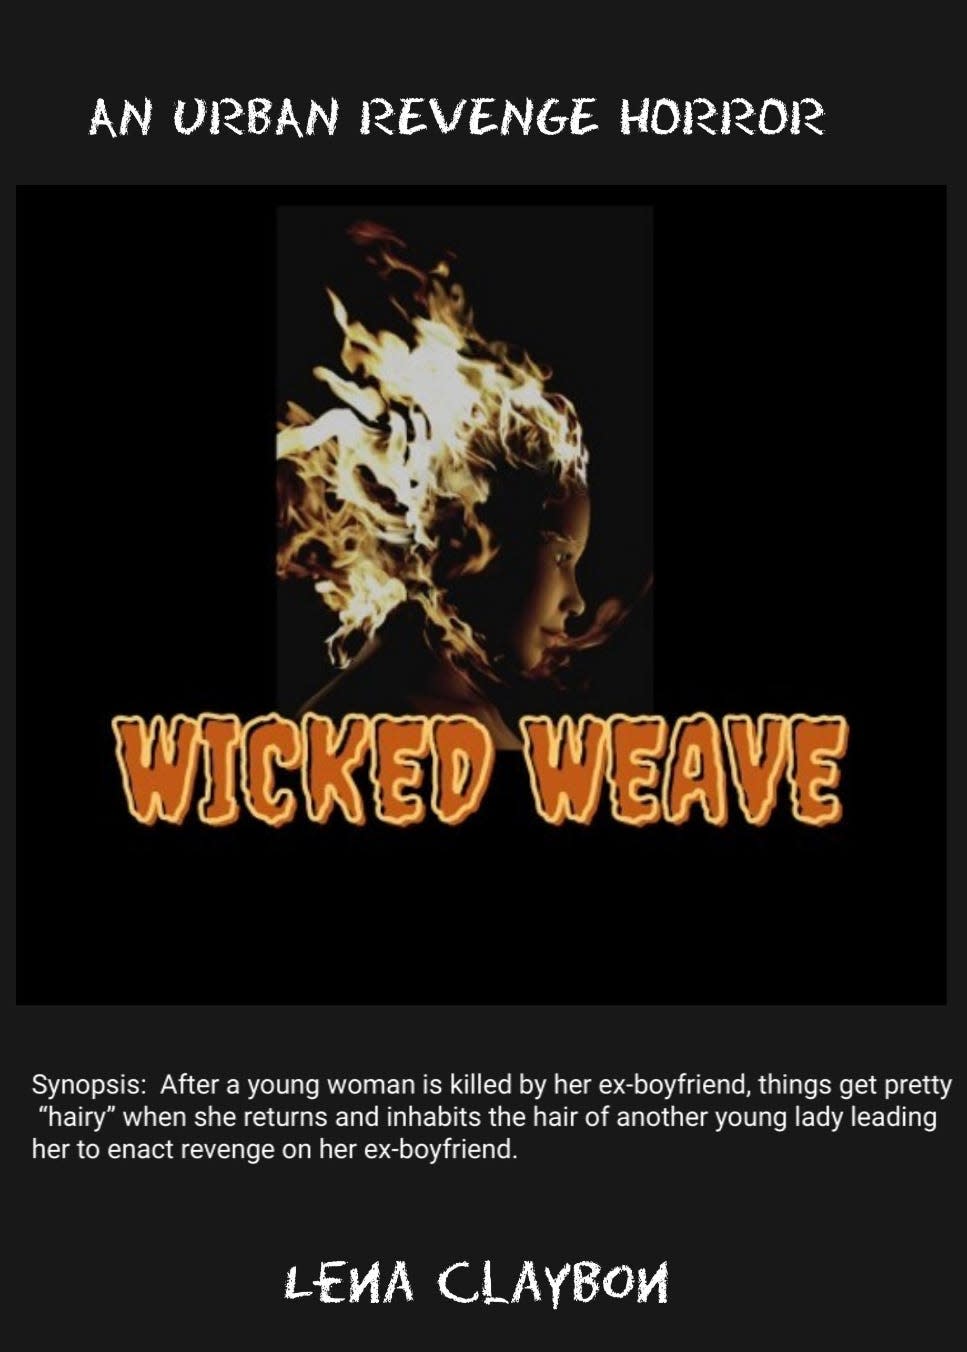 “Wicked Weave” is a project that has been 20 years in the making for filmmaker, director and writer Lena Claybon. She is seeking funding for the film project set to be filmed in Louisiana.